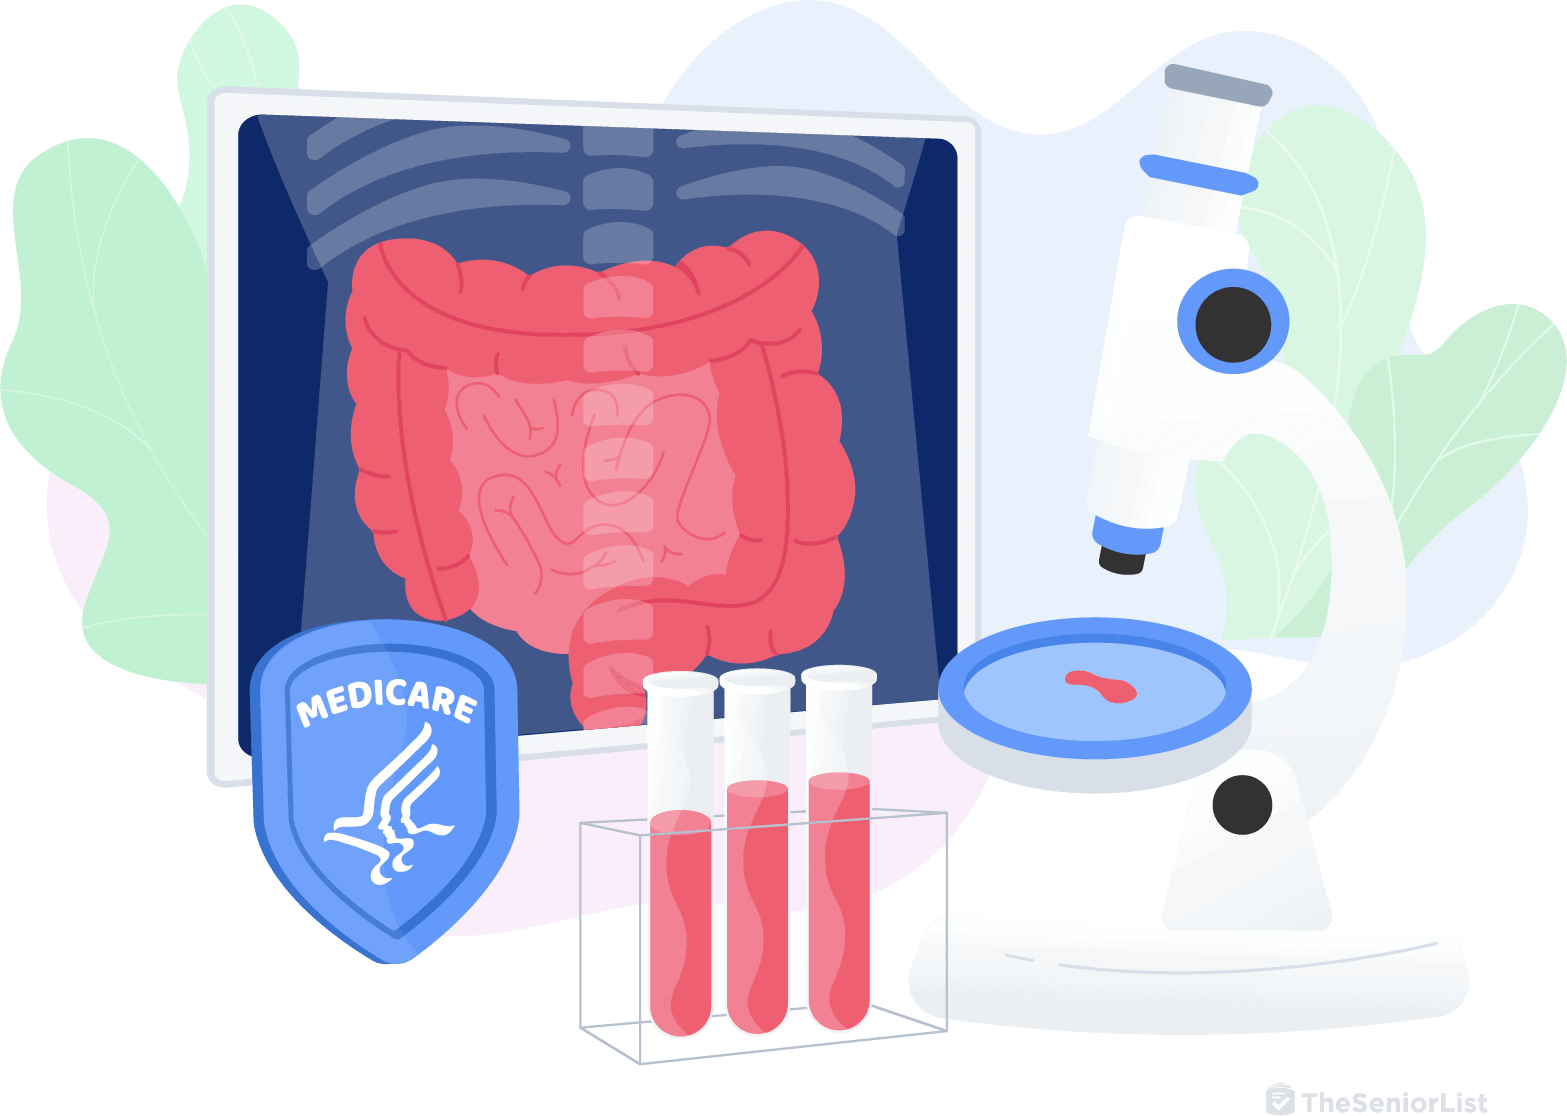 Medicare and Other Colon Screenings